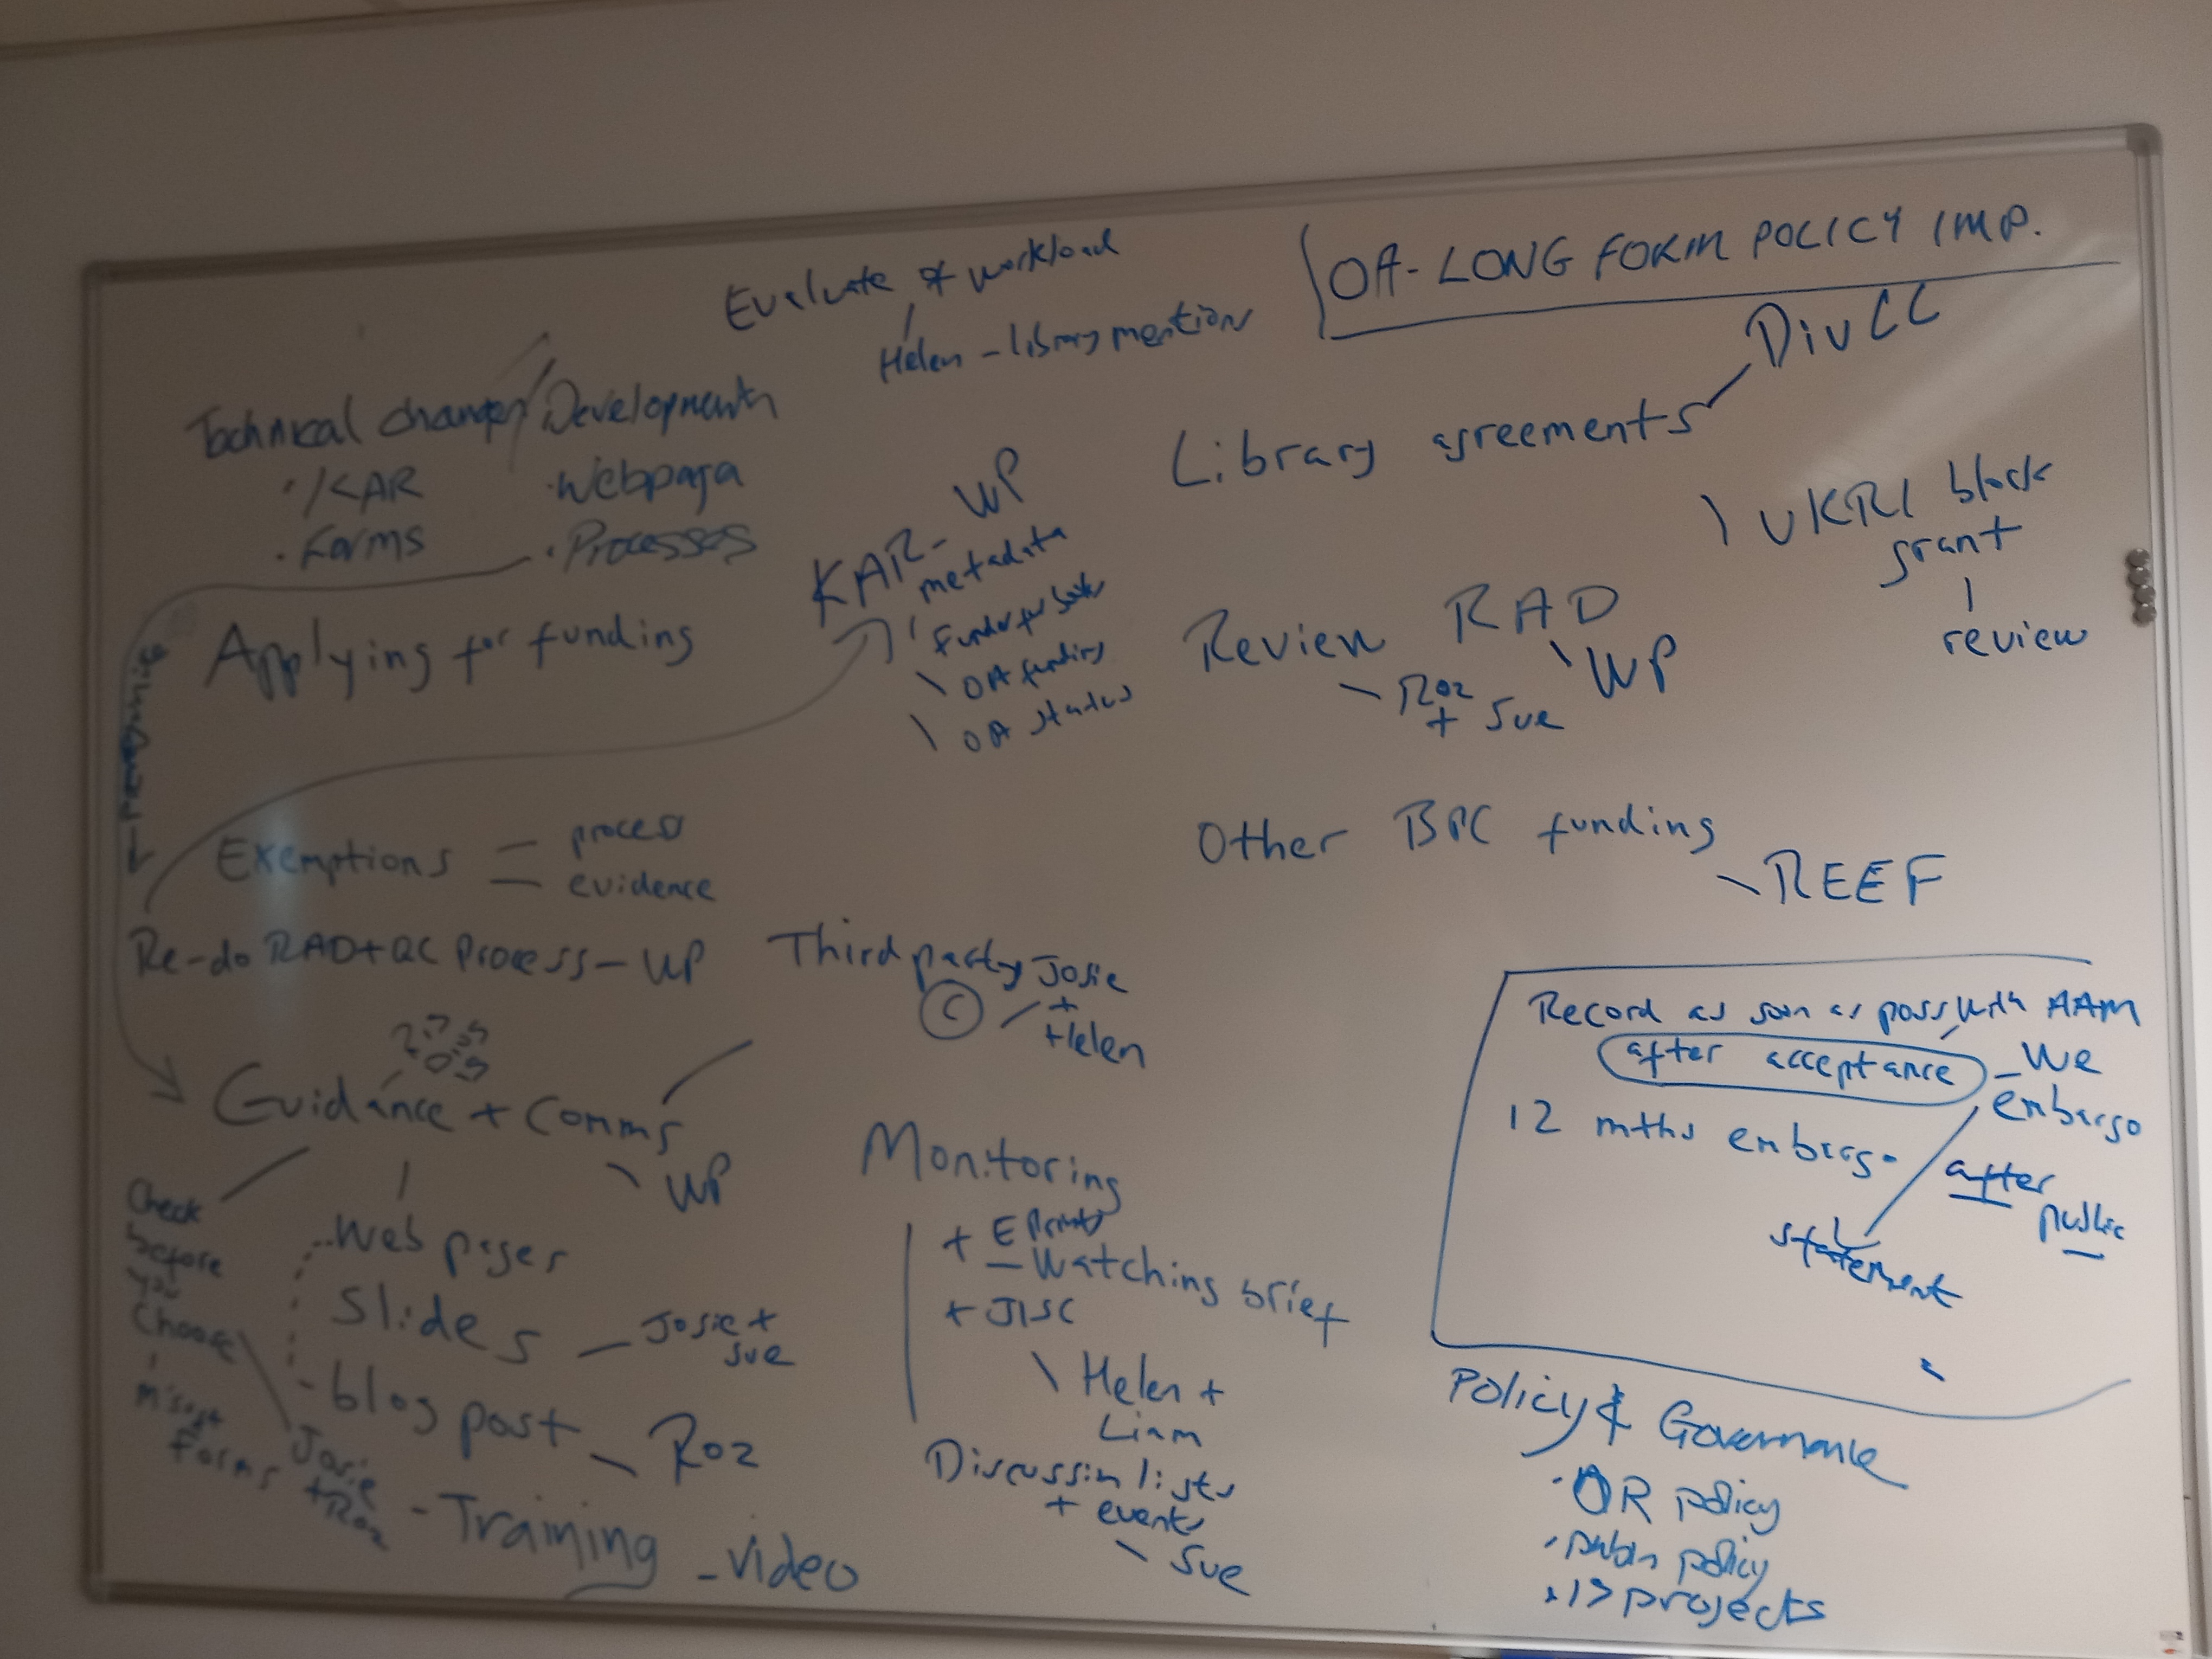 image of whiteboard with notes from working meeting indicating workflows etc